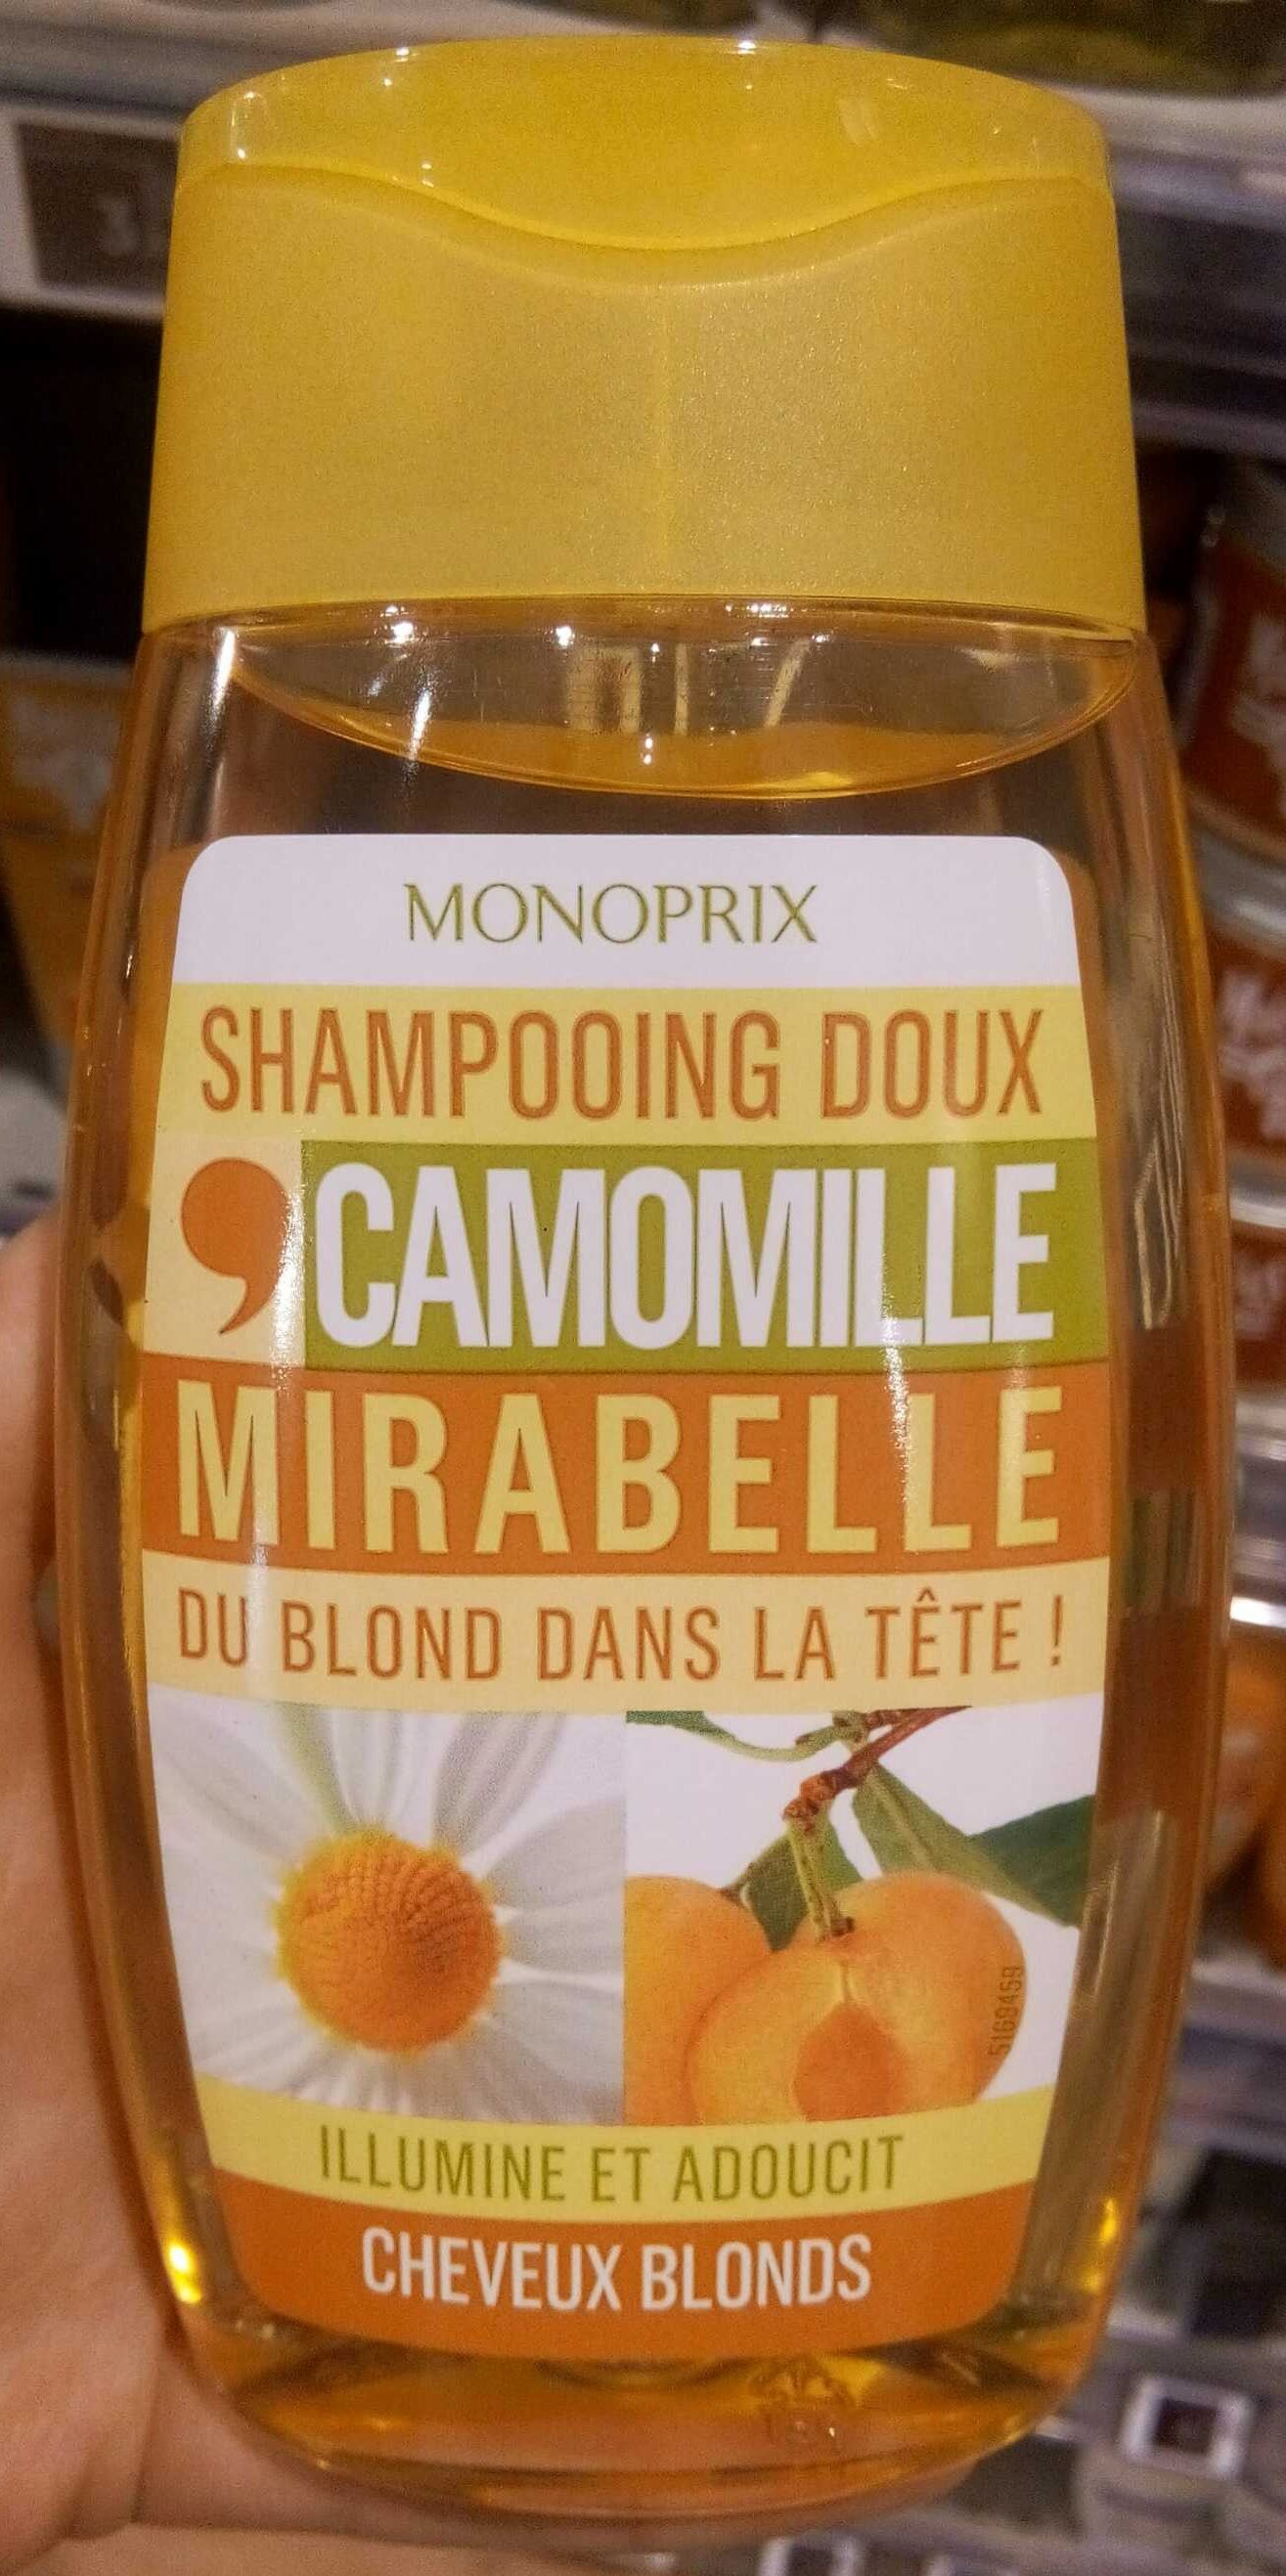 Shampooing doux camomille mirabelle - Tuote - fr